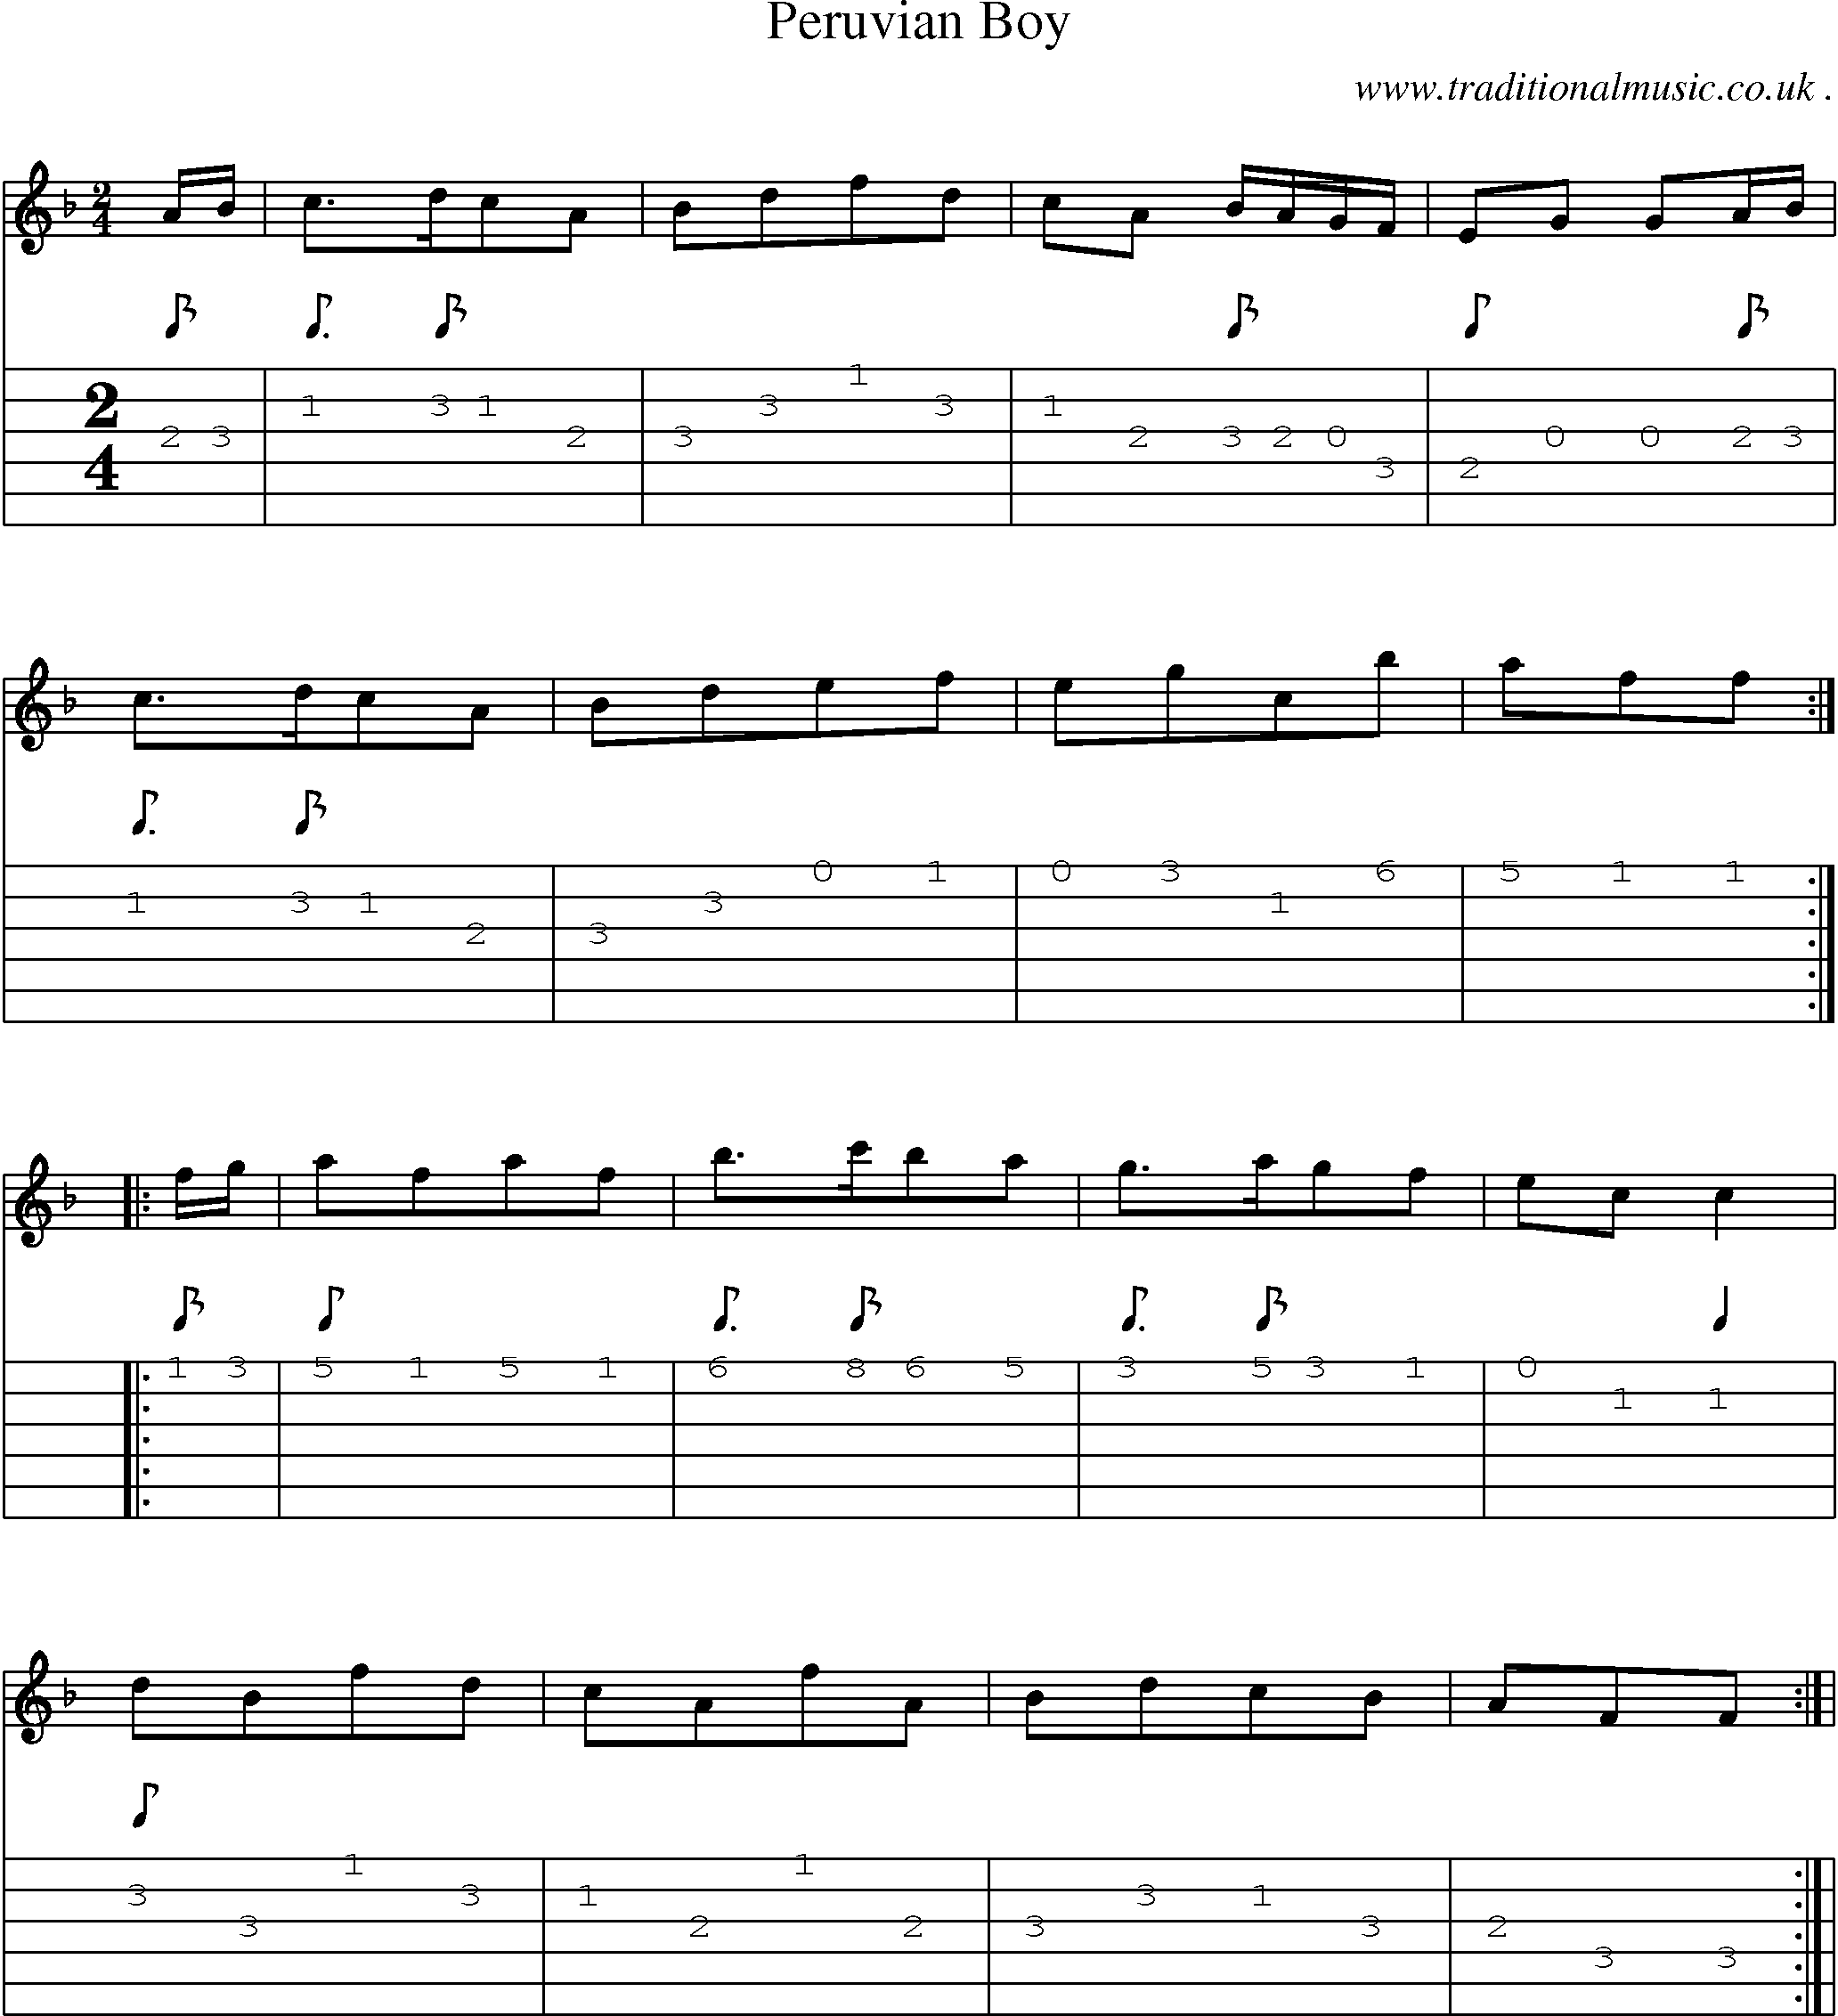 Sheet-Music and Guitar Tabs for Peruvian Boy